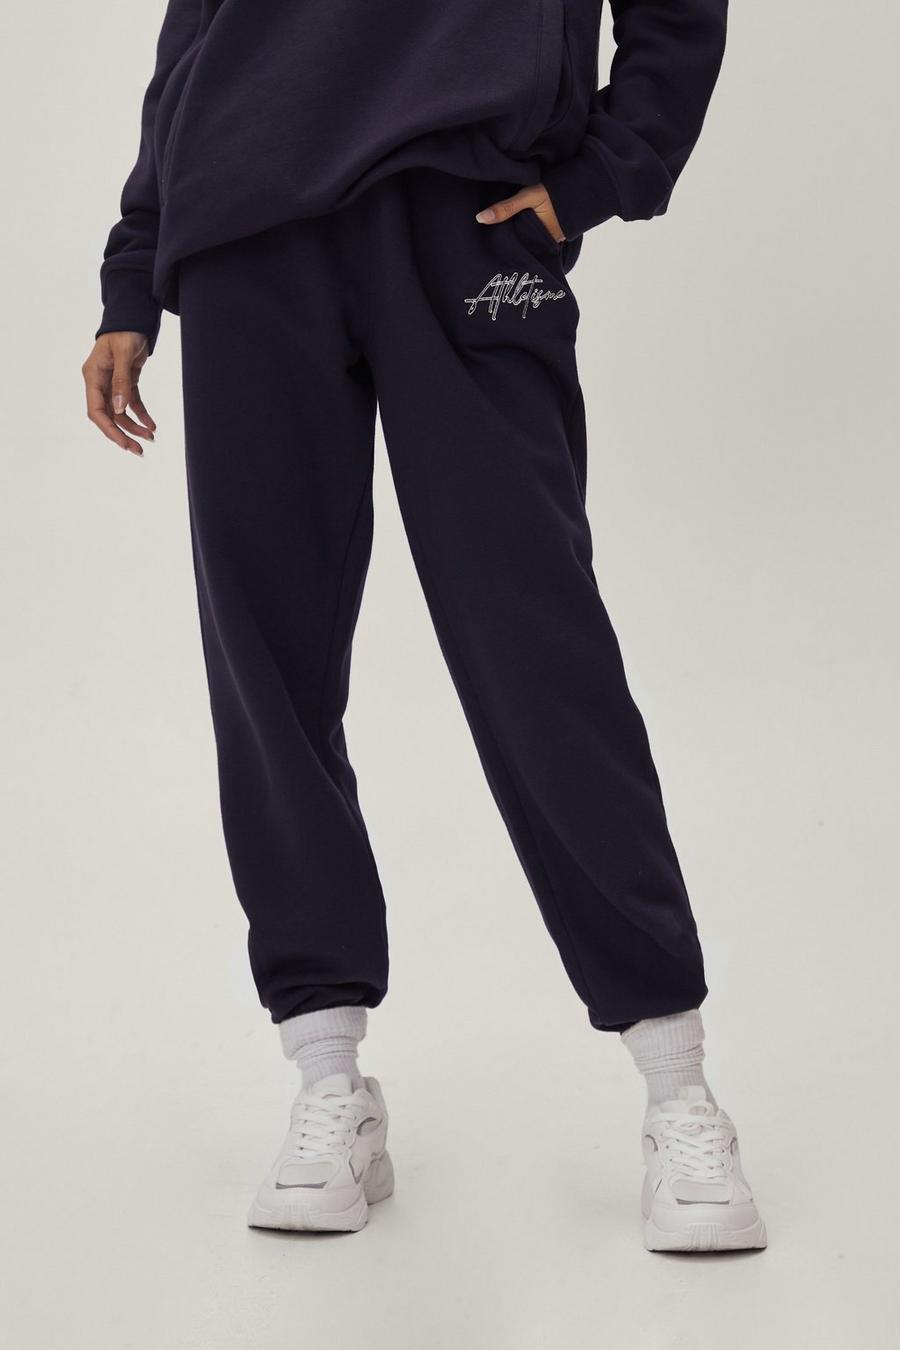 Embroidery Relaxed Fit Co-Ord Sweatpants